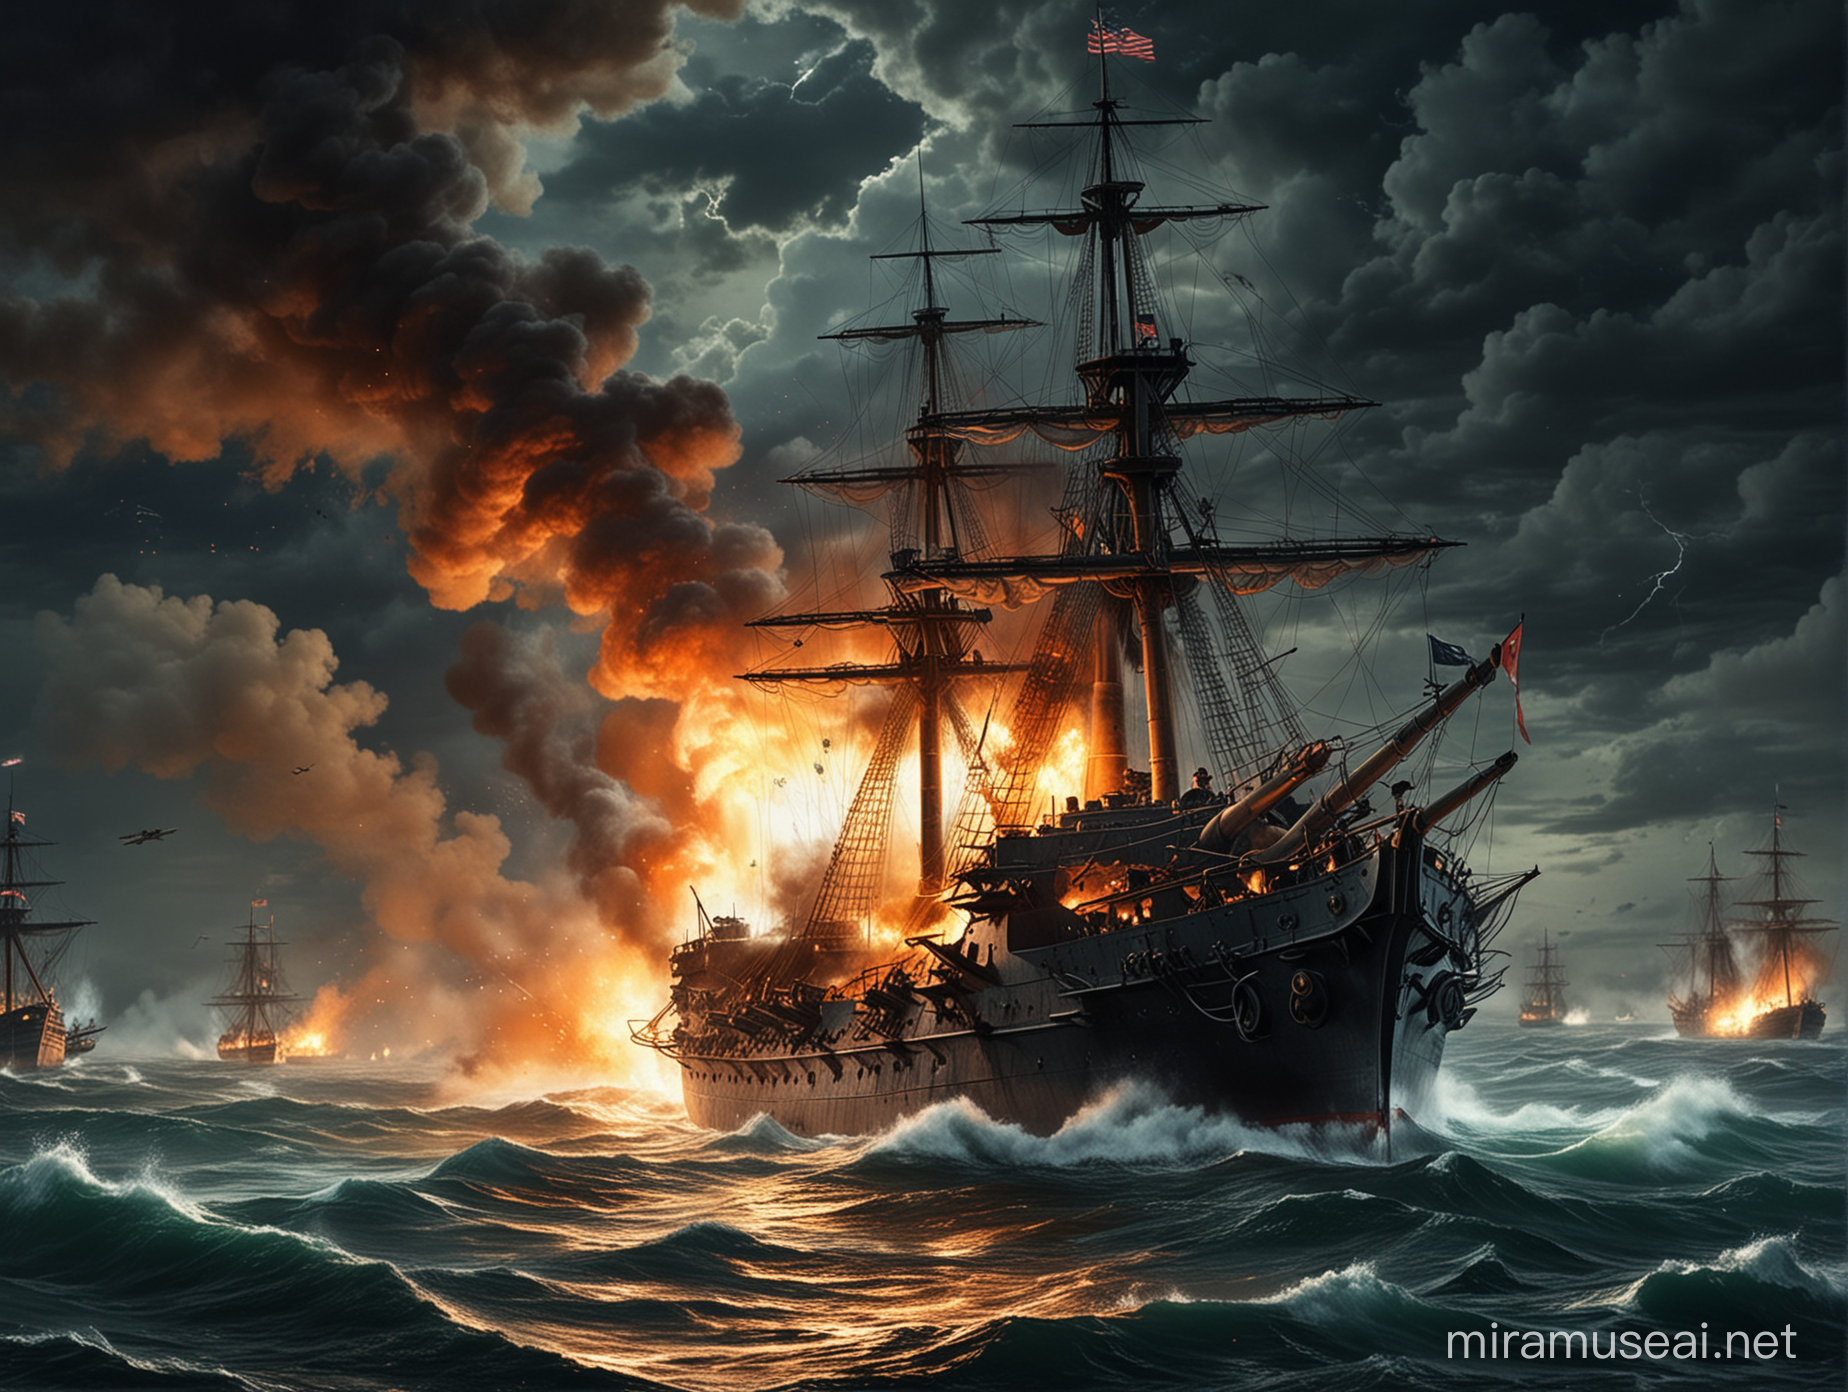 Battleship Firing Cannons Amidst Stormy Night Flames